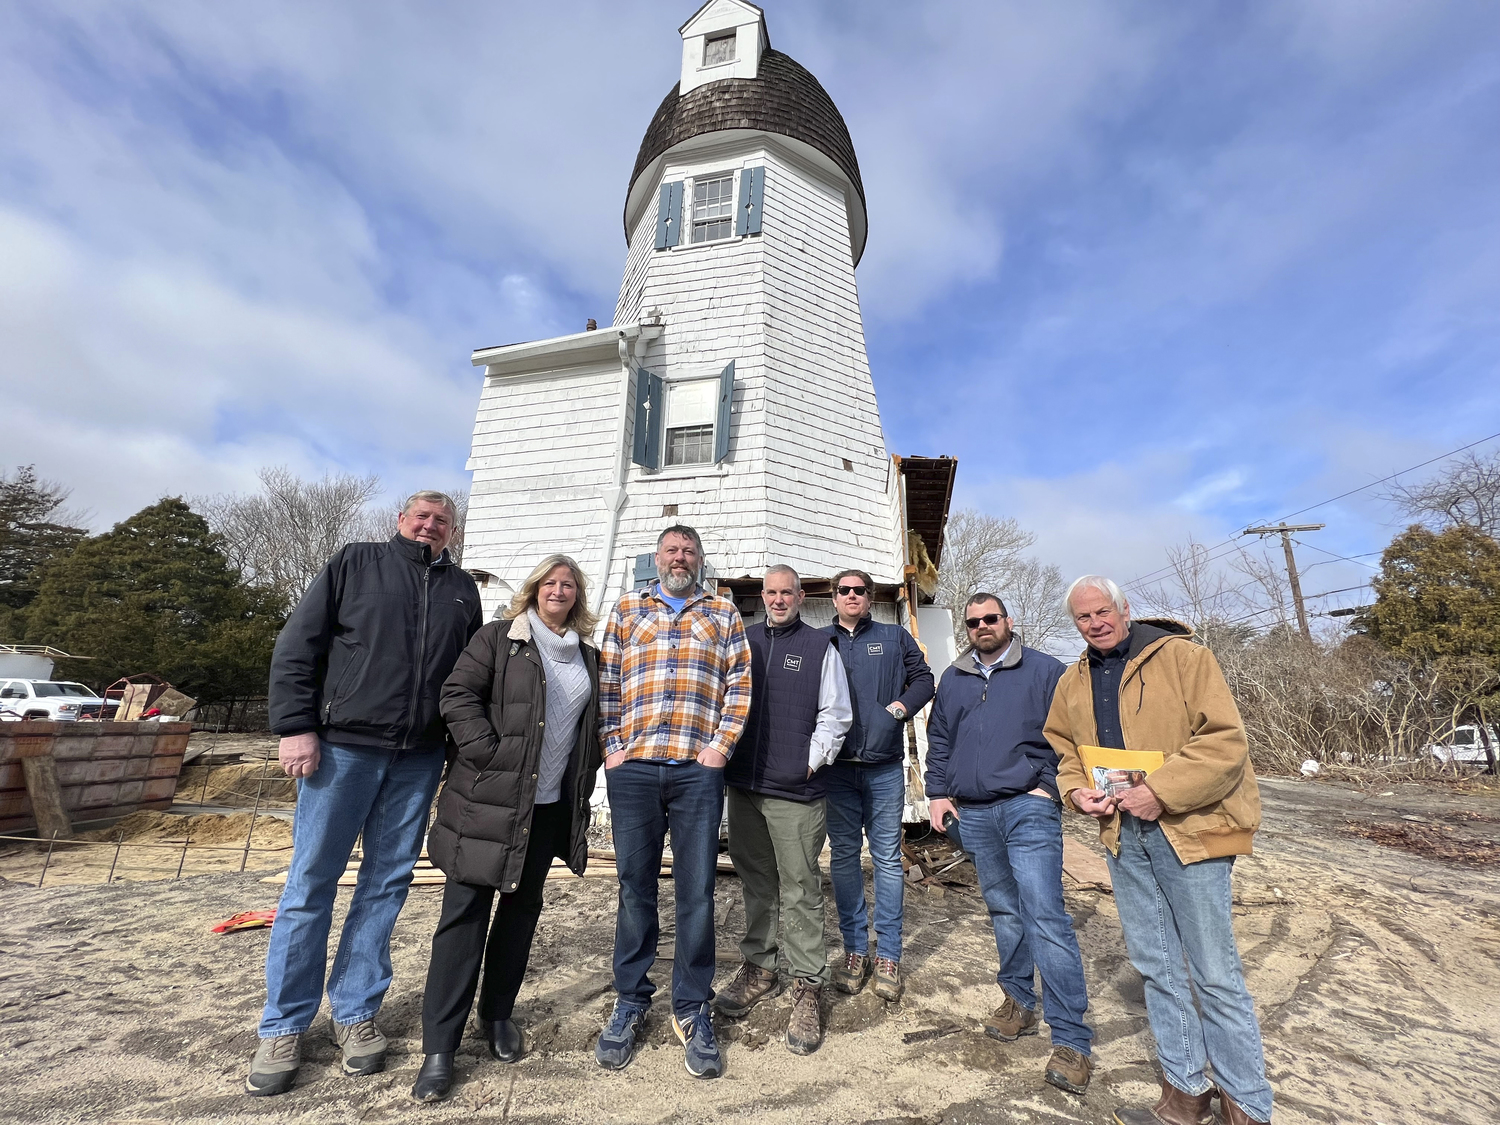 Westhampton Beach Village Deputy Mayor Ralph Urban, Mayor Maria Moore, Trustee Brian Tymann, CMT Builders Inc. owners Chris Truhn and Justin Schnepf, consultant Nick Bono, and Larry Jones at the Dix Windmill in Westhampton Beach in February 2022.
DANA SHAW